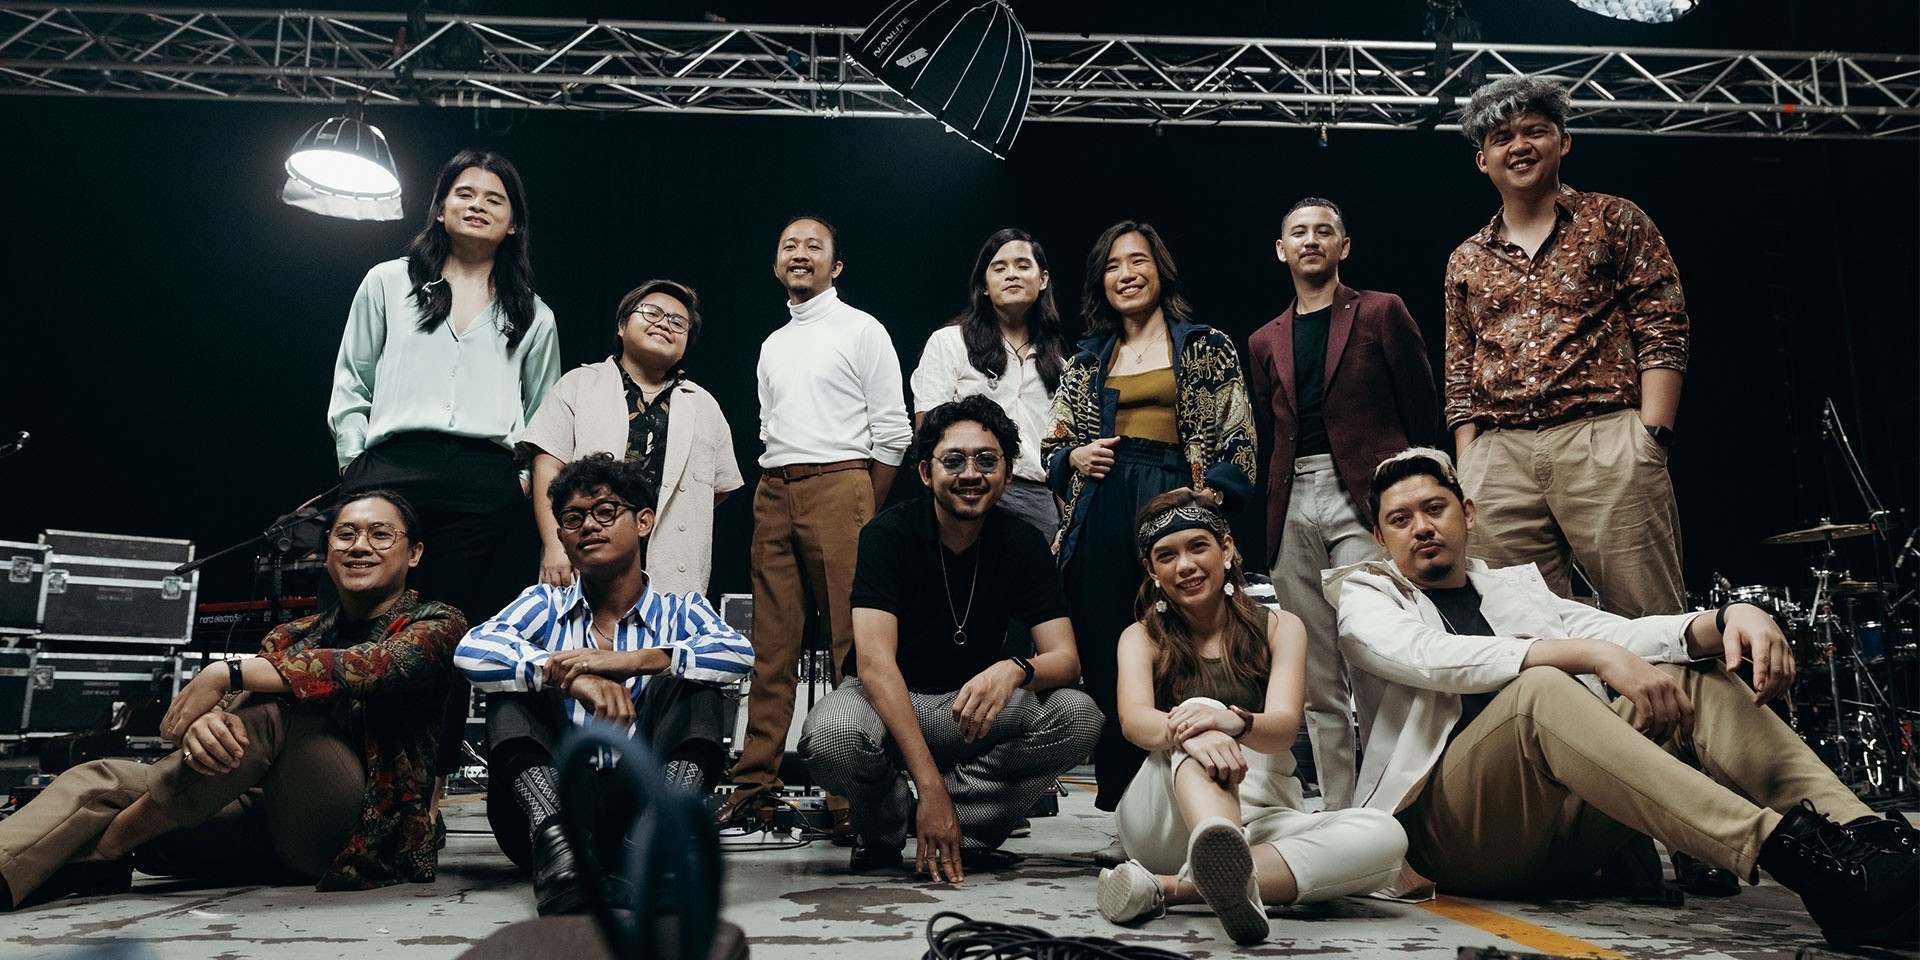 Ben&Ben link with Pamungkas for new take of 'Paninindigan Kita' with 'Stand By You' – listen